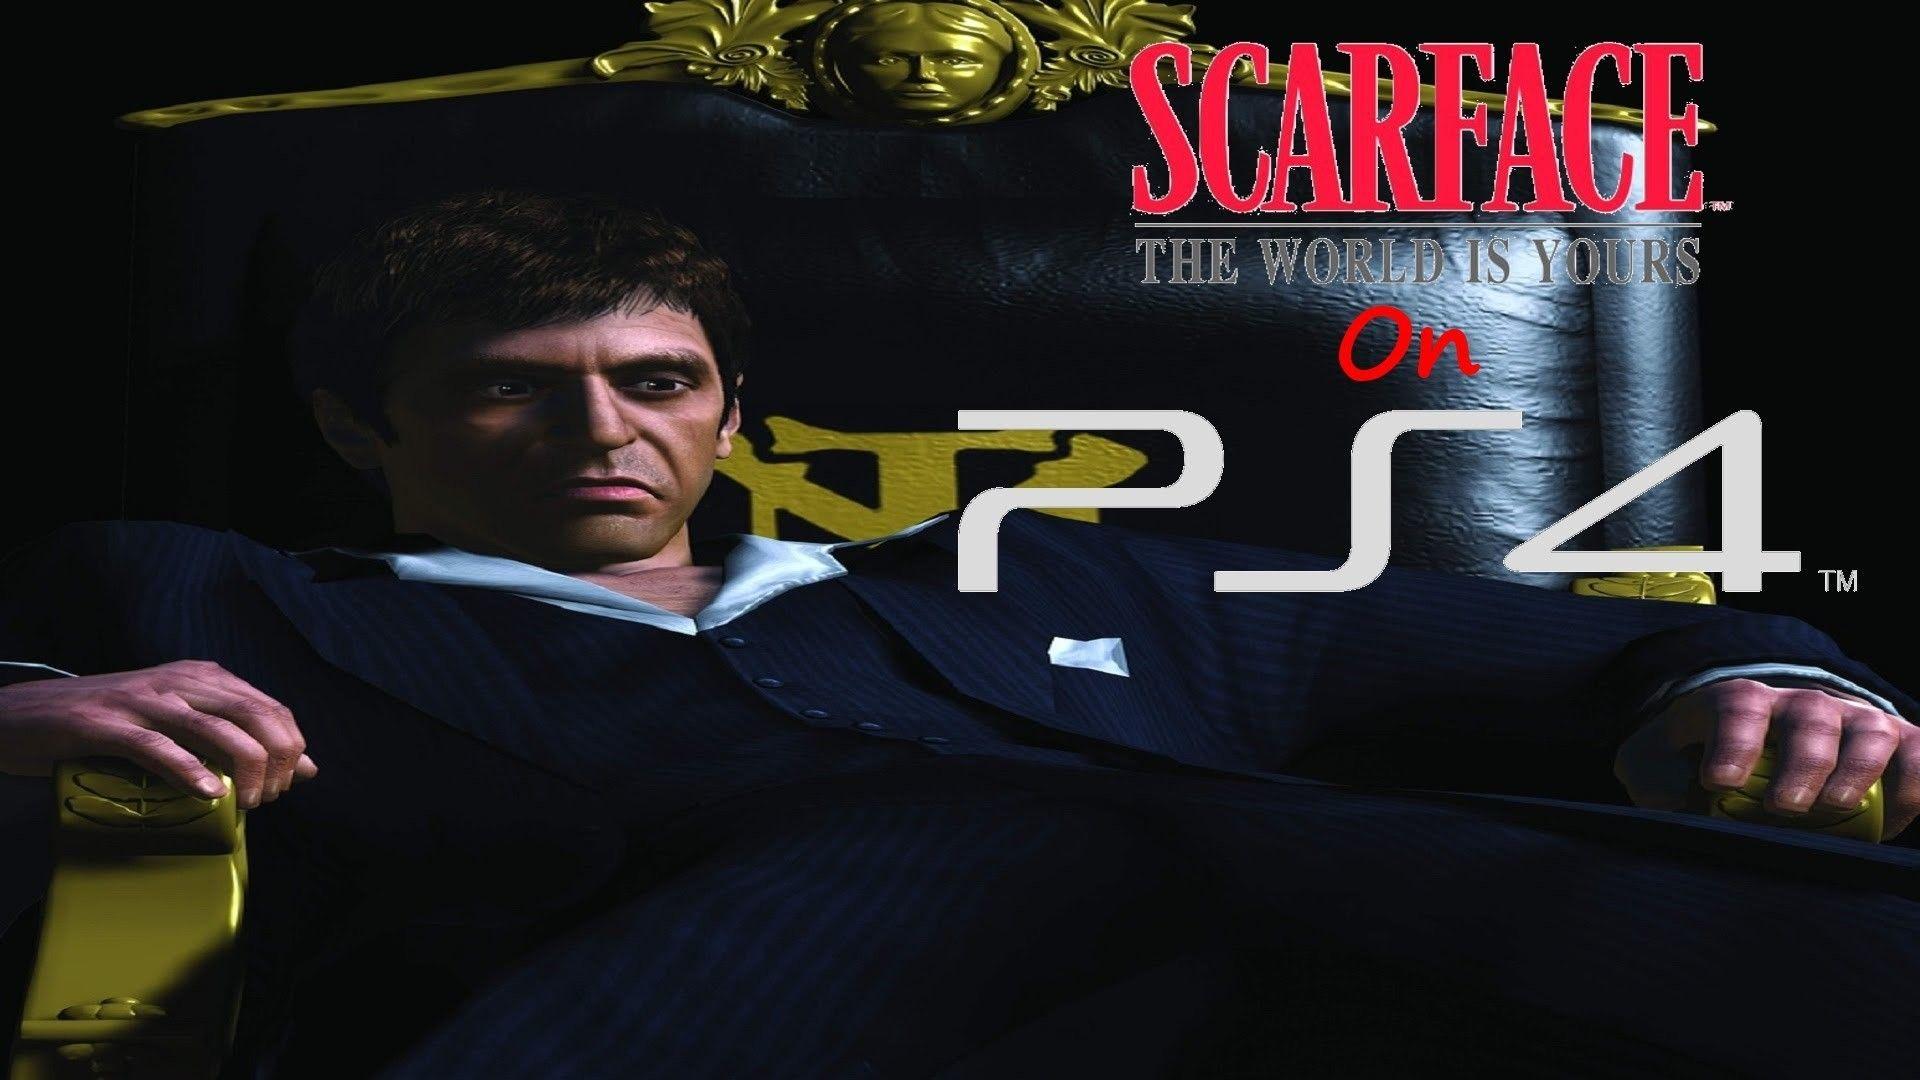 Scarface Pictures Scarface Wallpapers